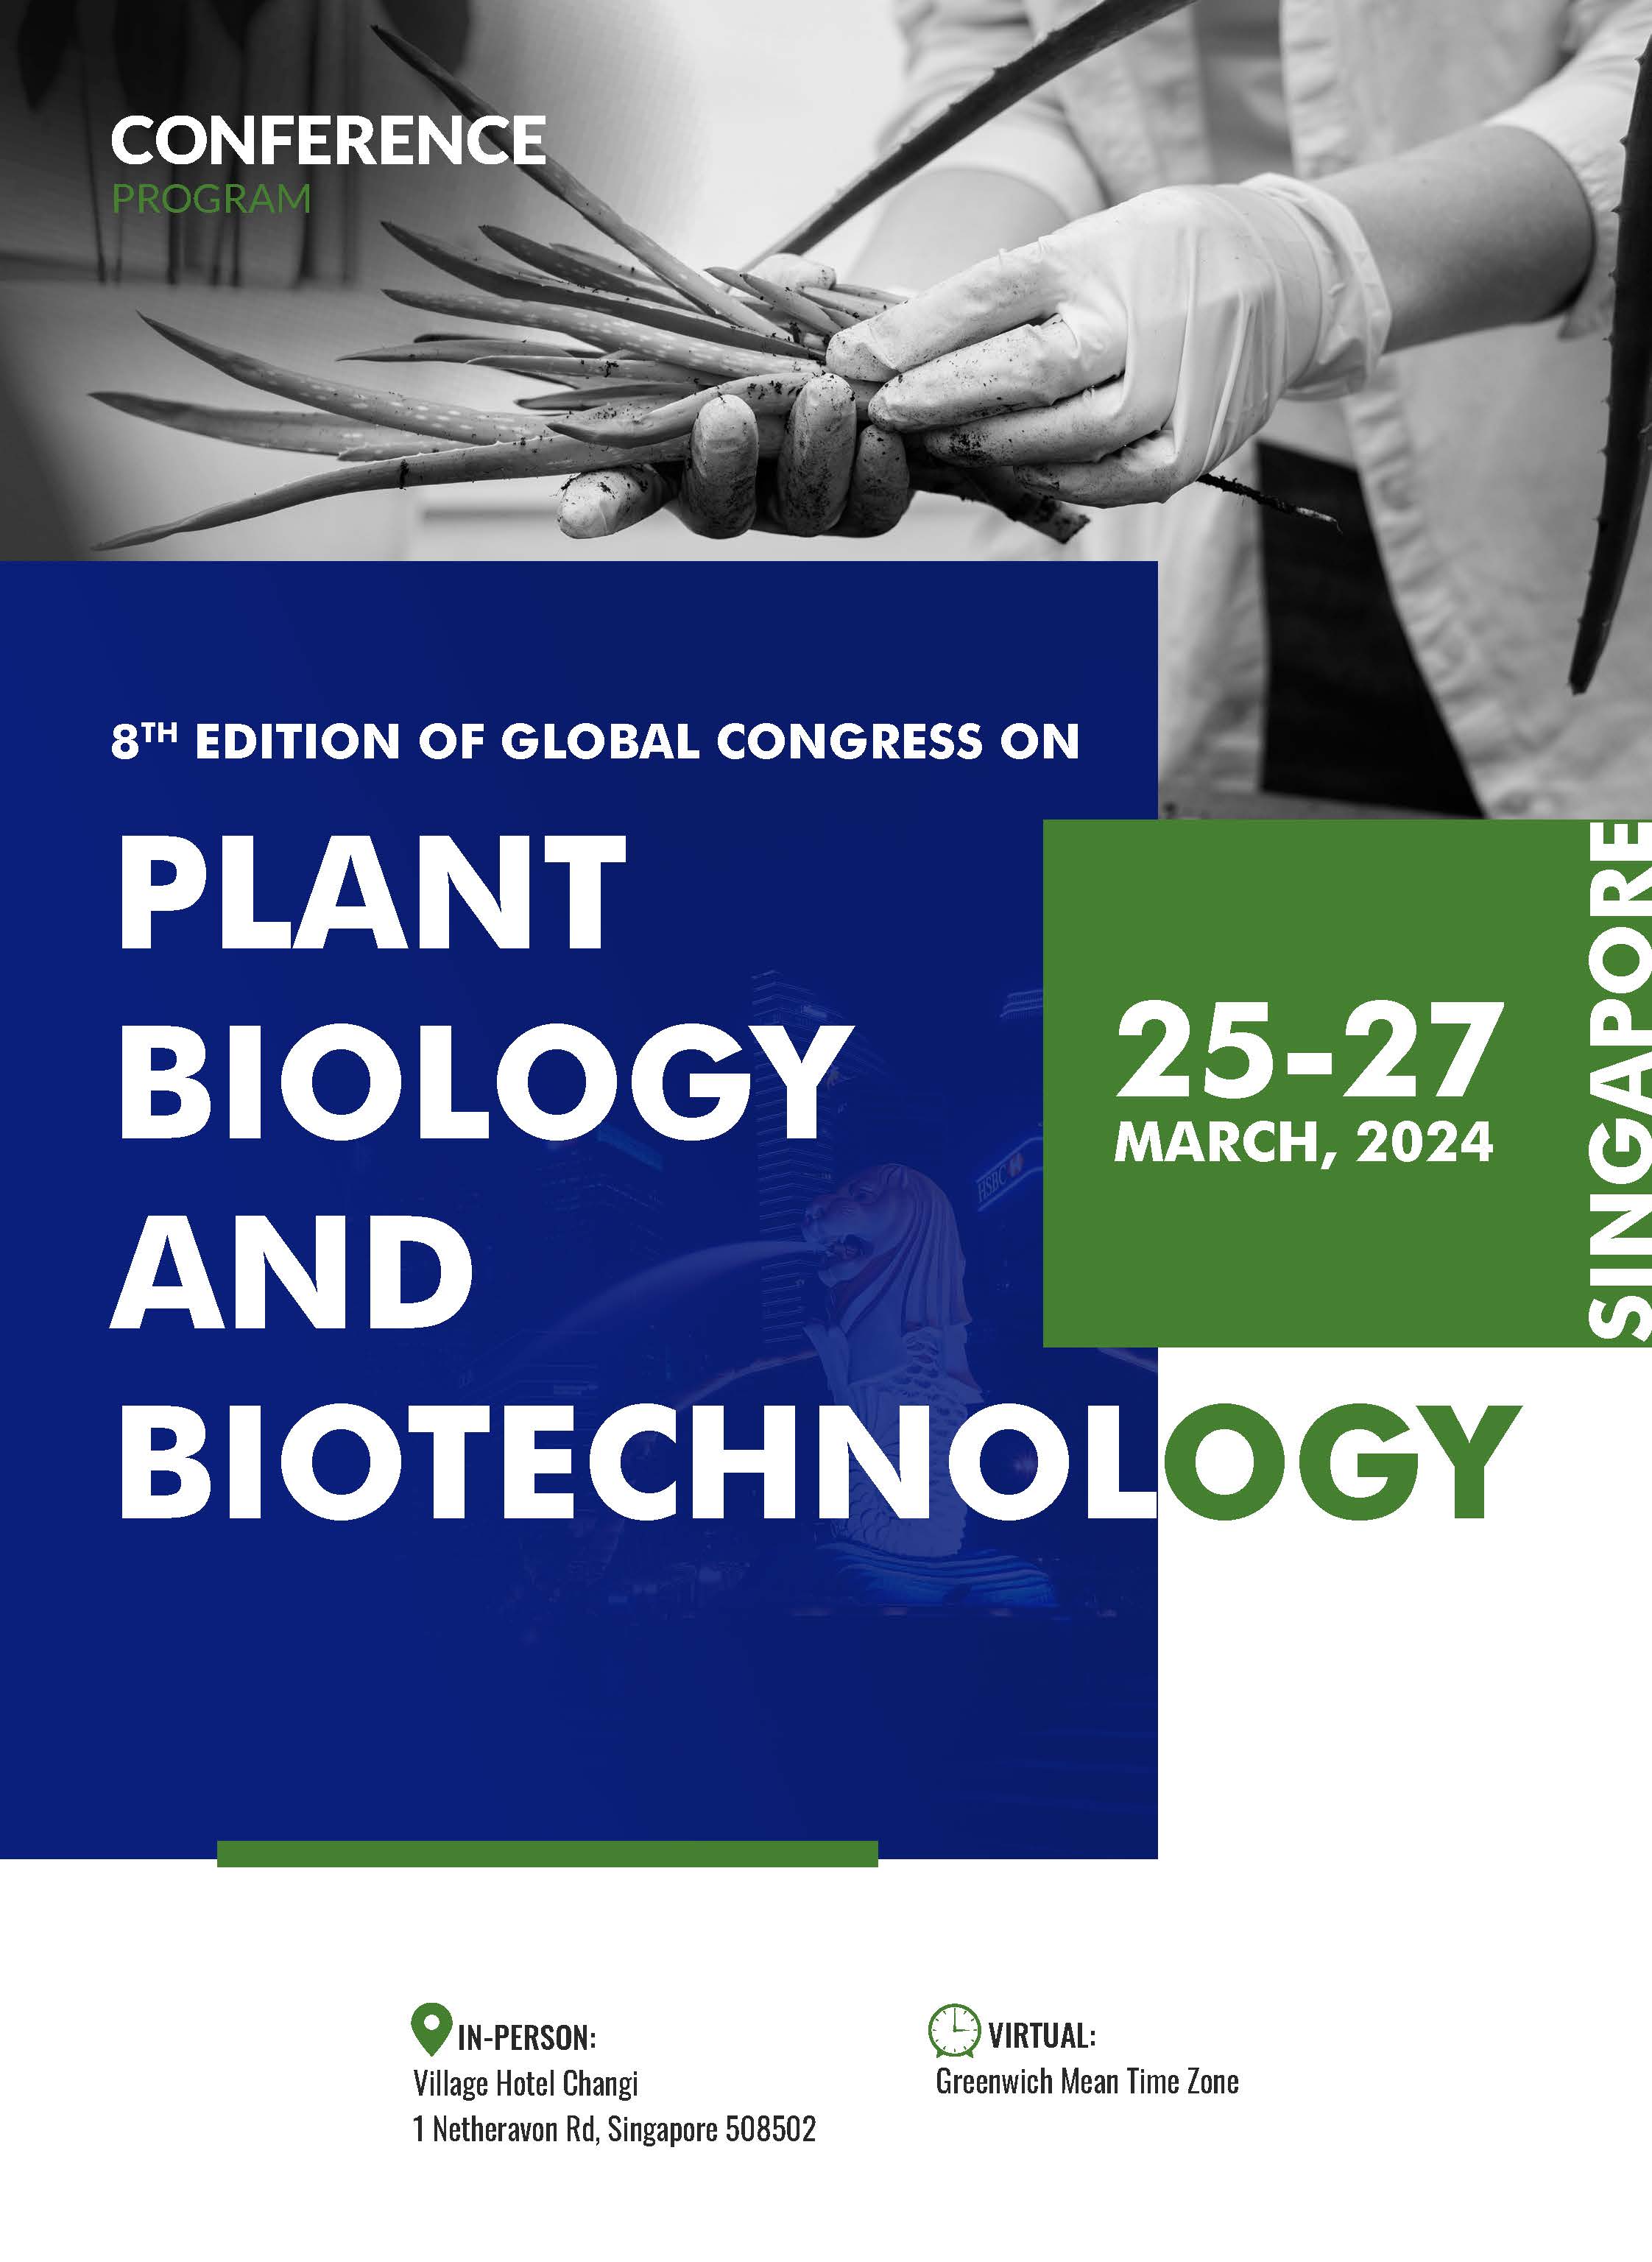 8th Edition of Global Congress on Plant Biology and Biotechnology | Singapore Program